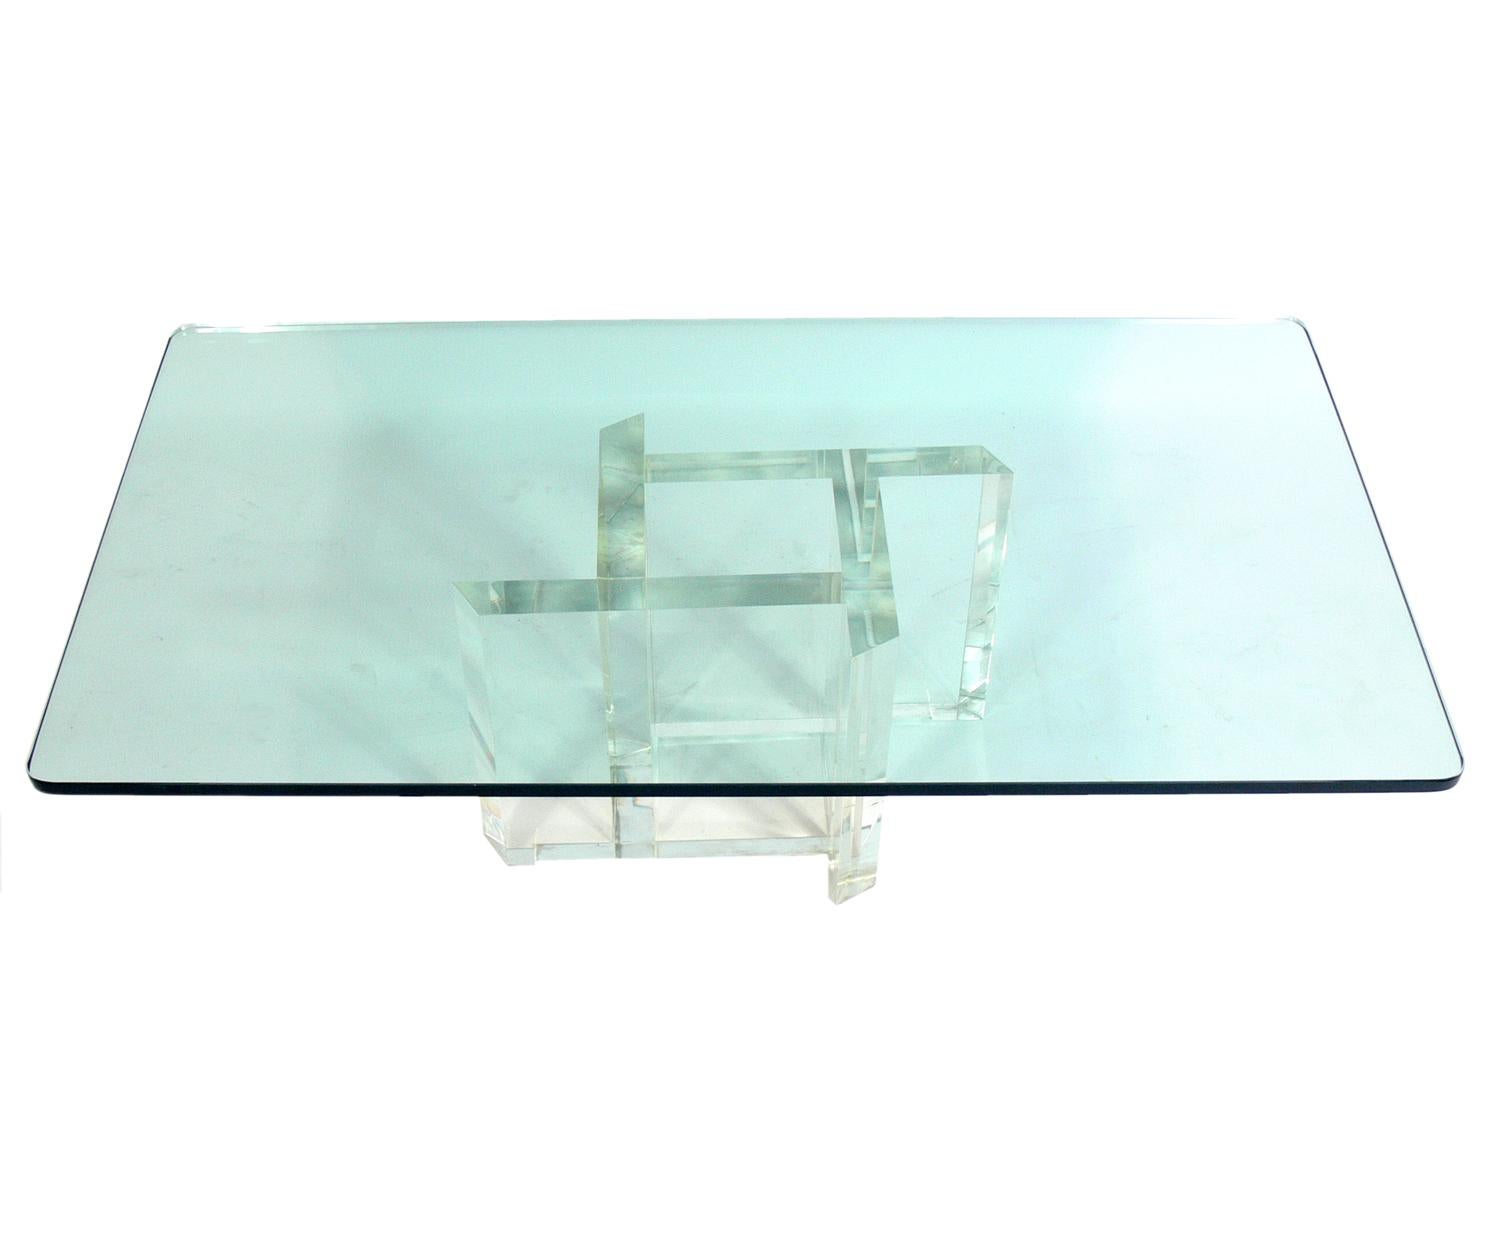 Les Prismatiques Lucite and glass coffee table, American, circa 1970s. Signed Les Prismatiques on base. It is well constructed with a chunky Lucite or acrylic base and a thick rectangular glass top.
  